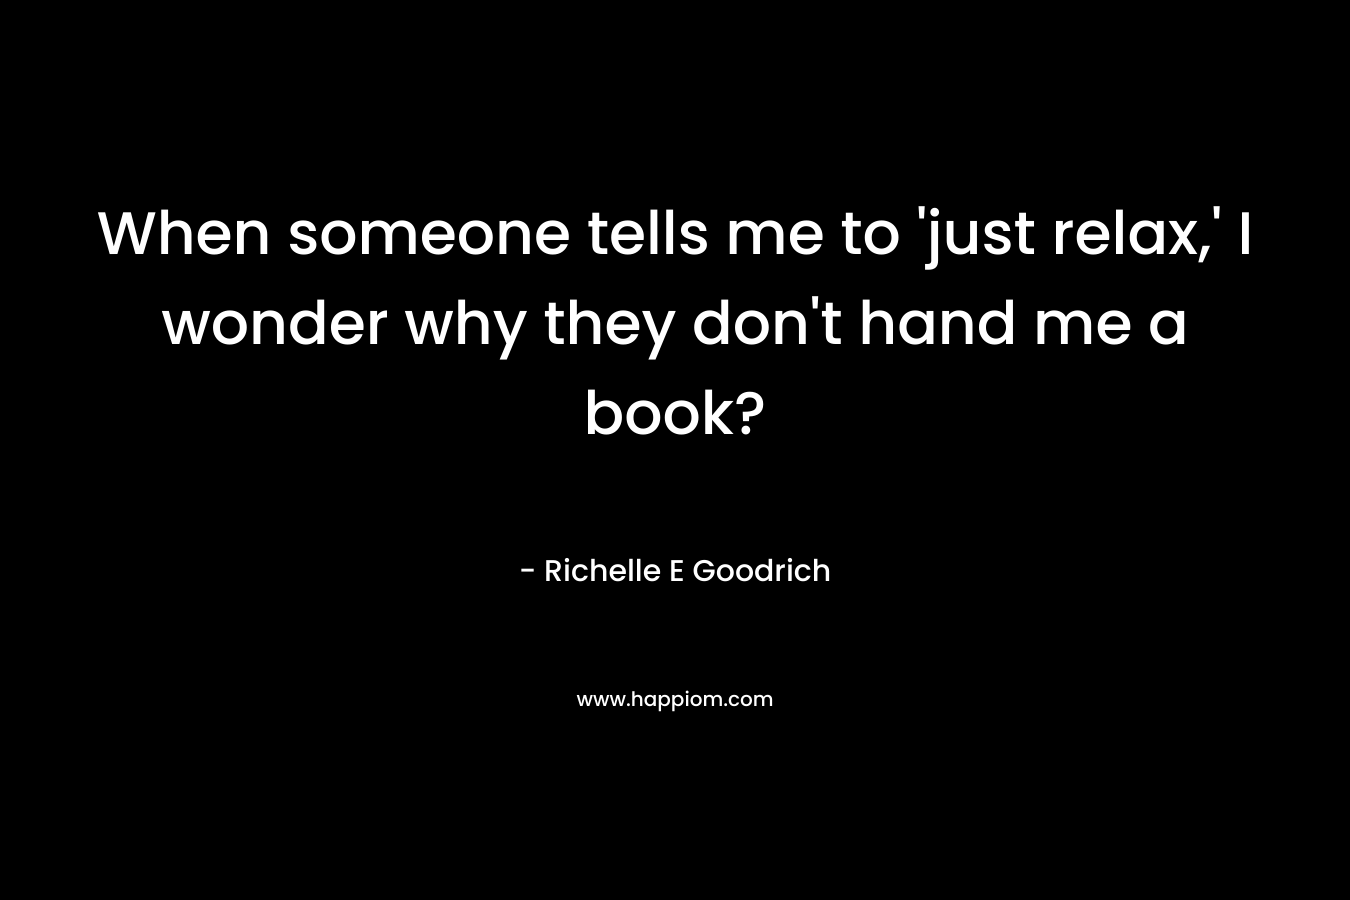 When someone tells me to 'just relax,' I wonder why they don't hand me a book?